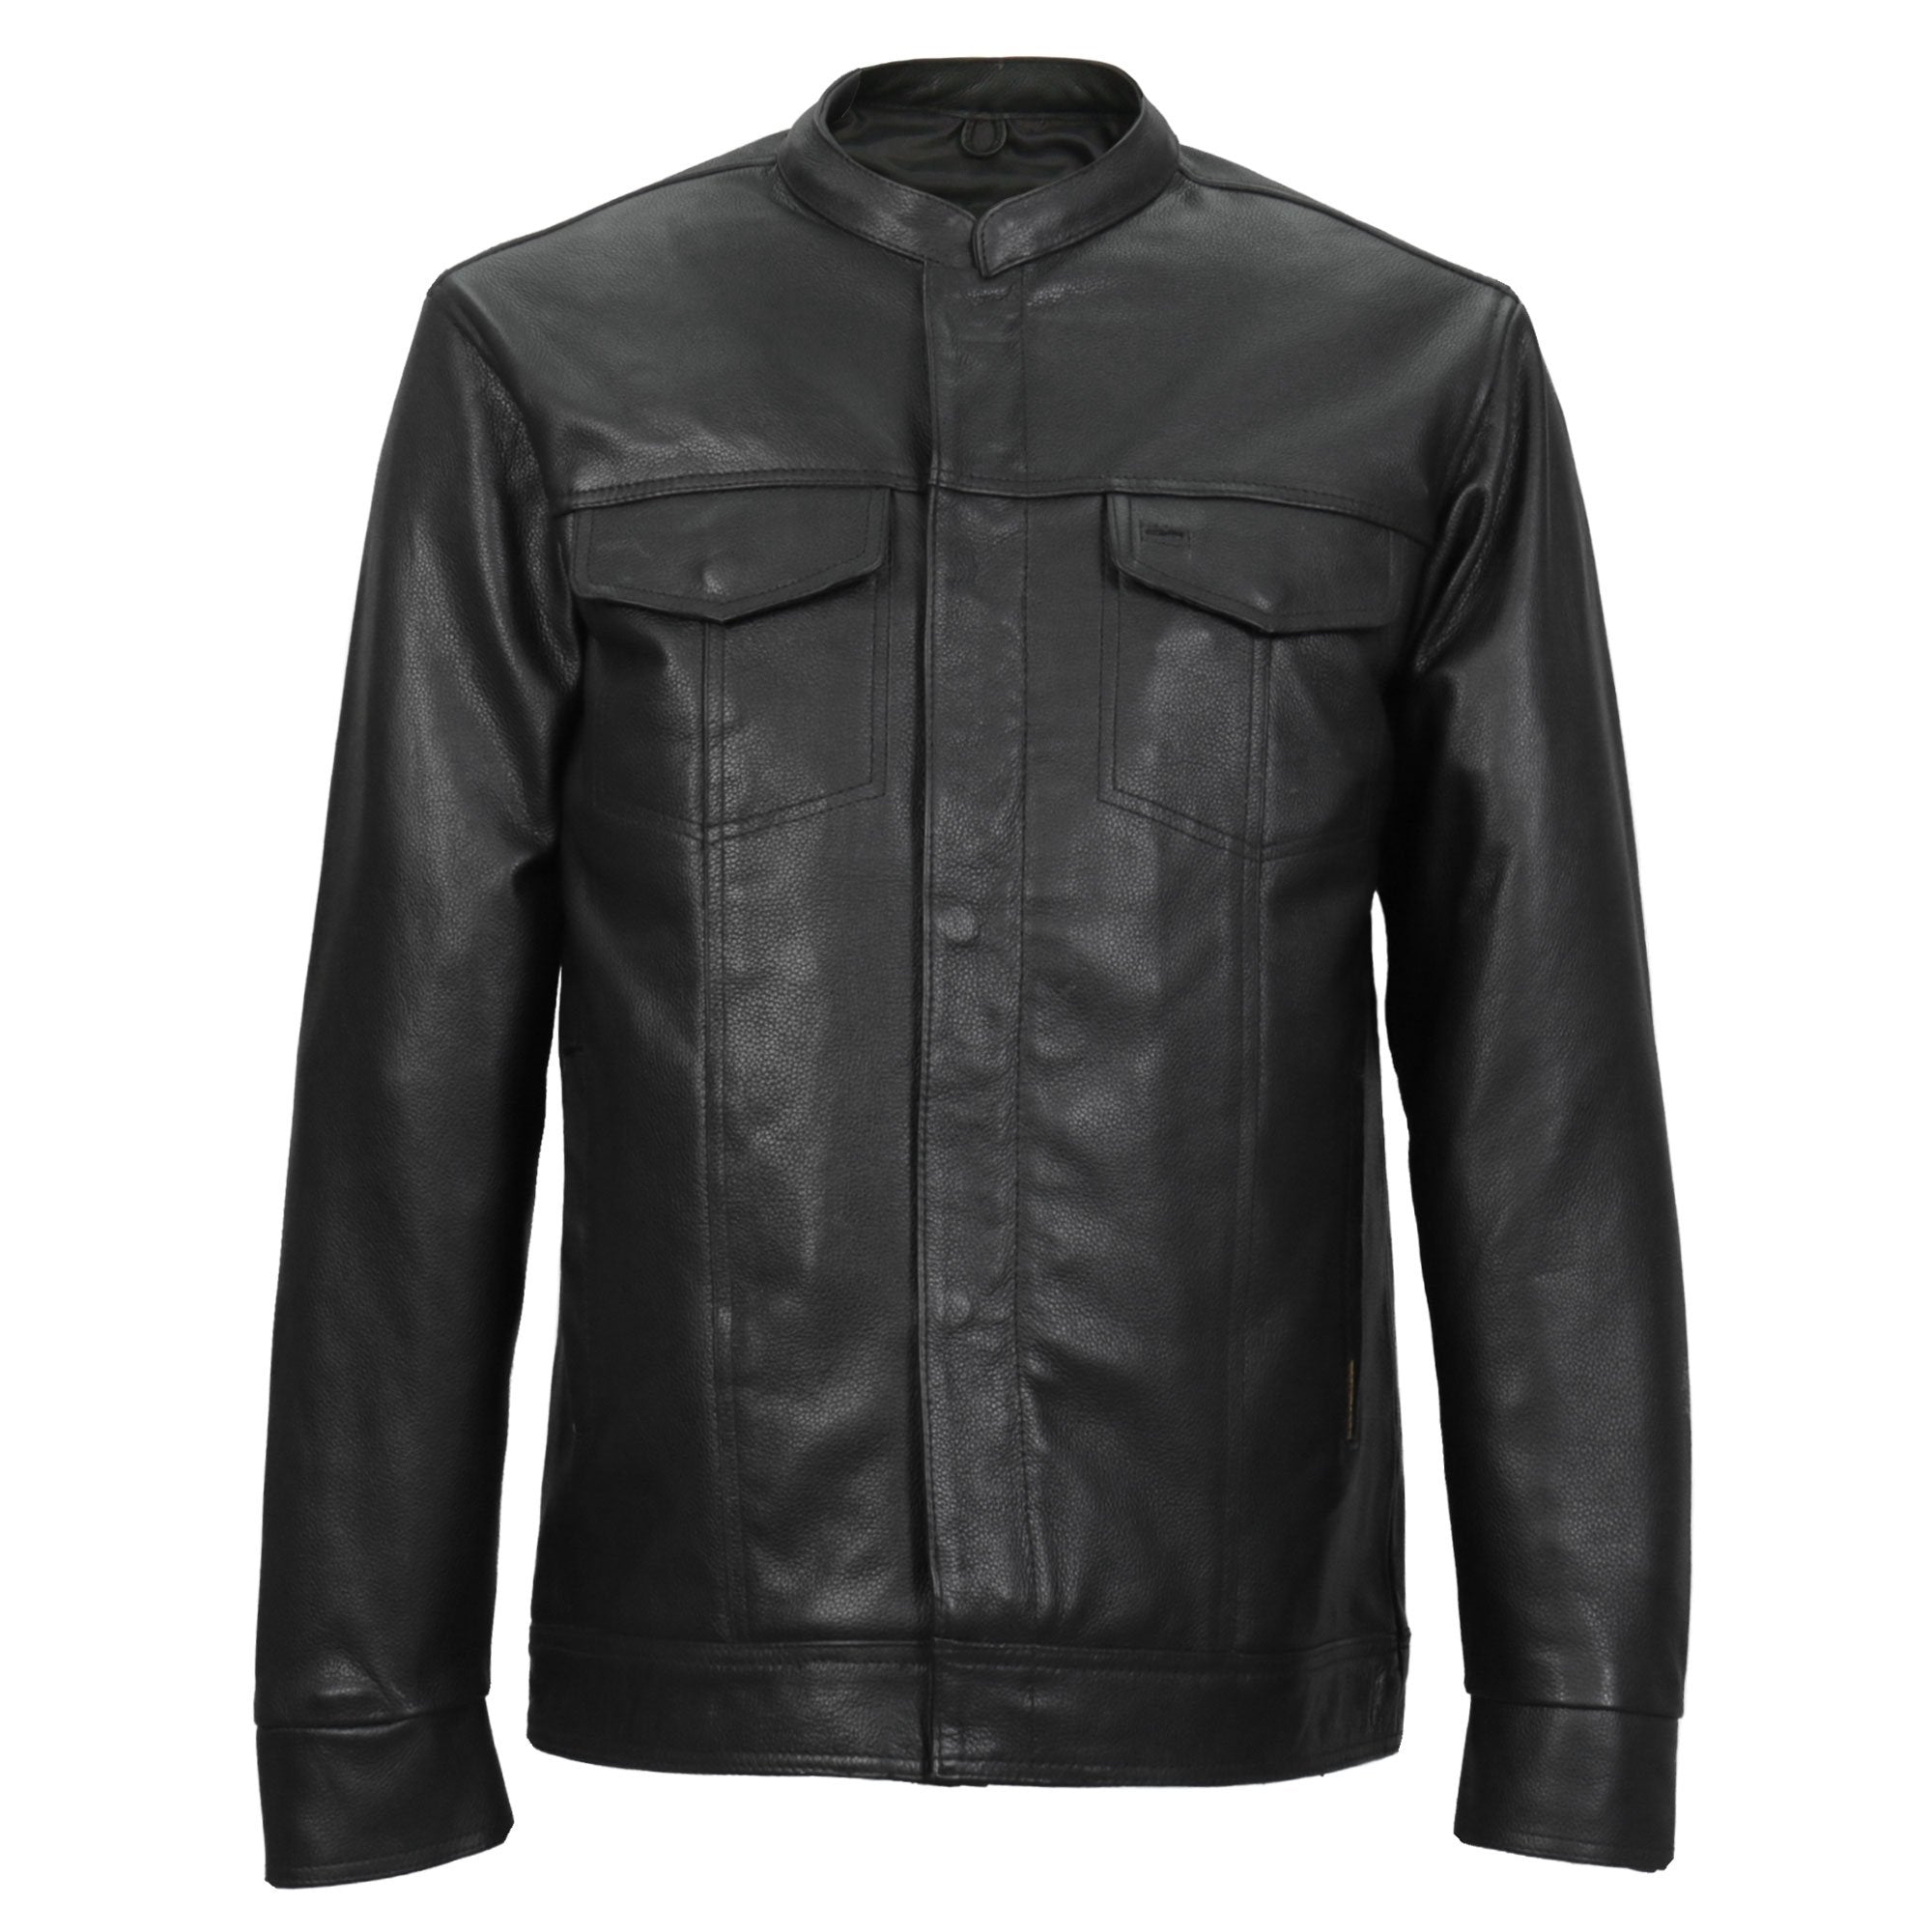 Hot Leathers LCS1005 Mens Hidden Snap Motorcycle style Concealed Carry Black Leather Biker Shirt